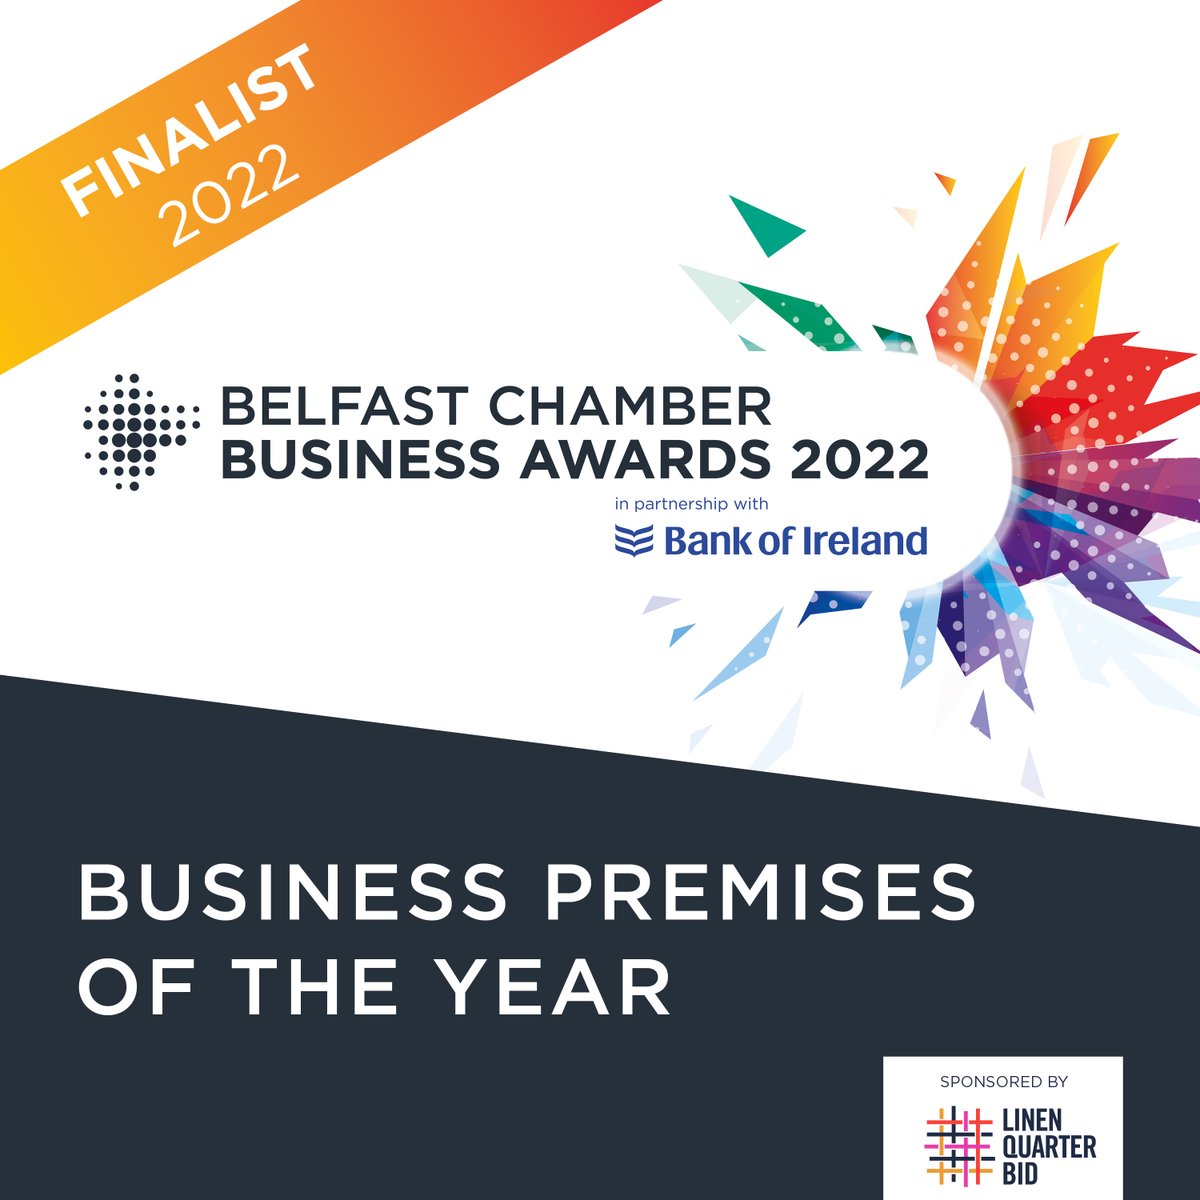 Since returning home to Belfast city centre in autumn 2021, Germinal Holdings Ltd has been named as a finalist for Business Premises of the Year in the @BelfastChamber Business Awards 2022. #Belfast #BelfastBusiness #NIBusiness